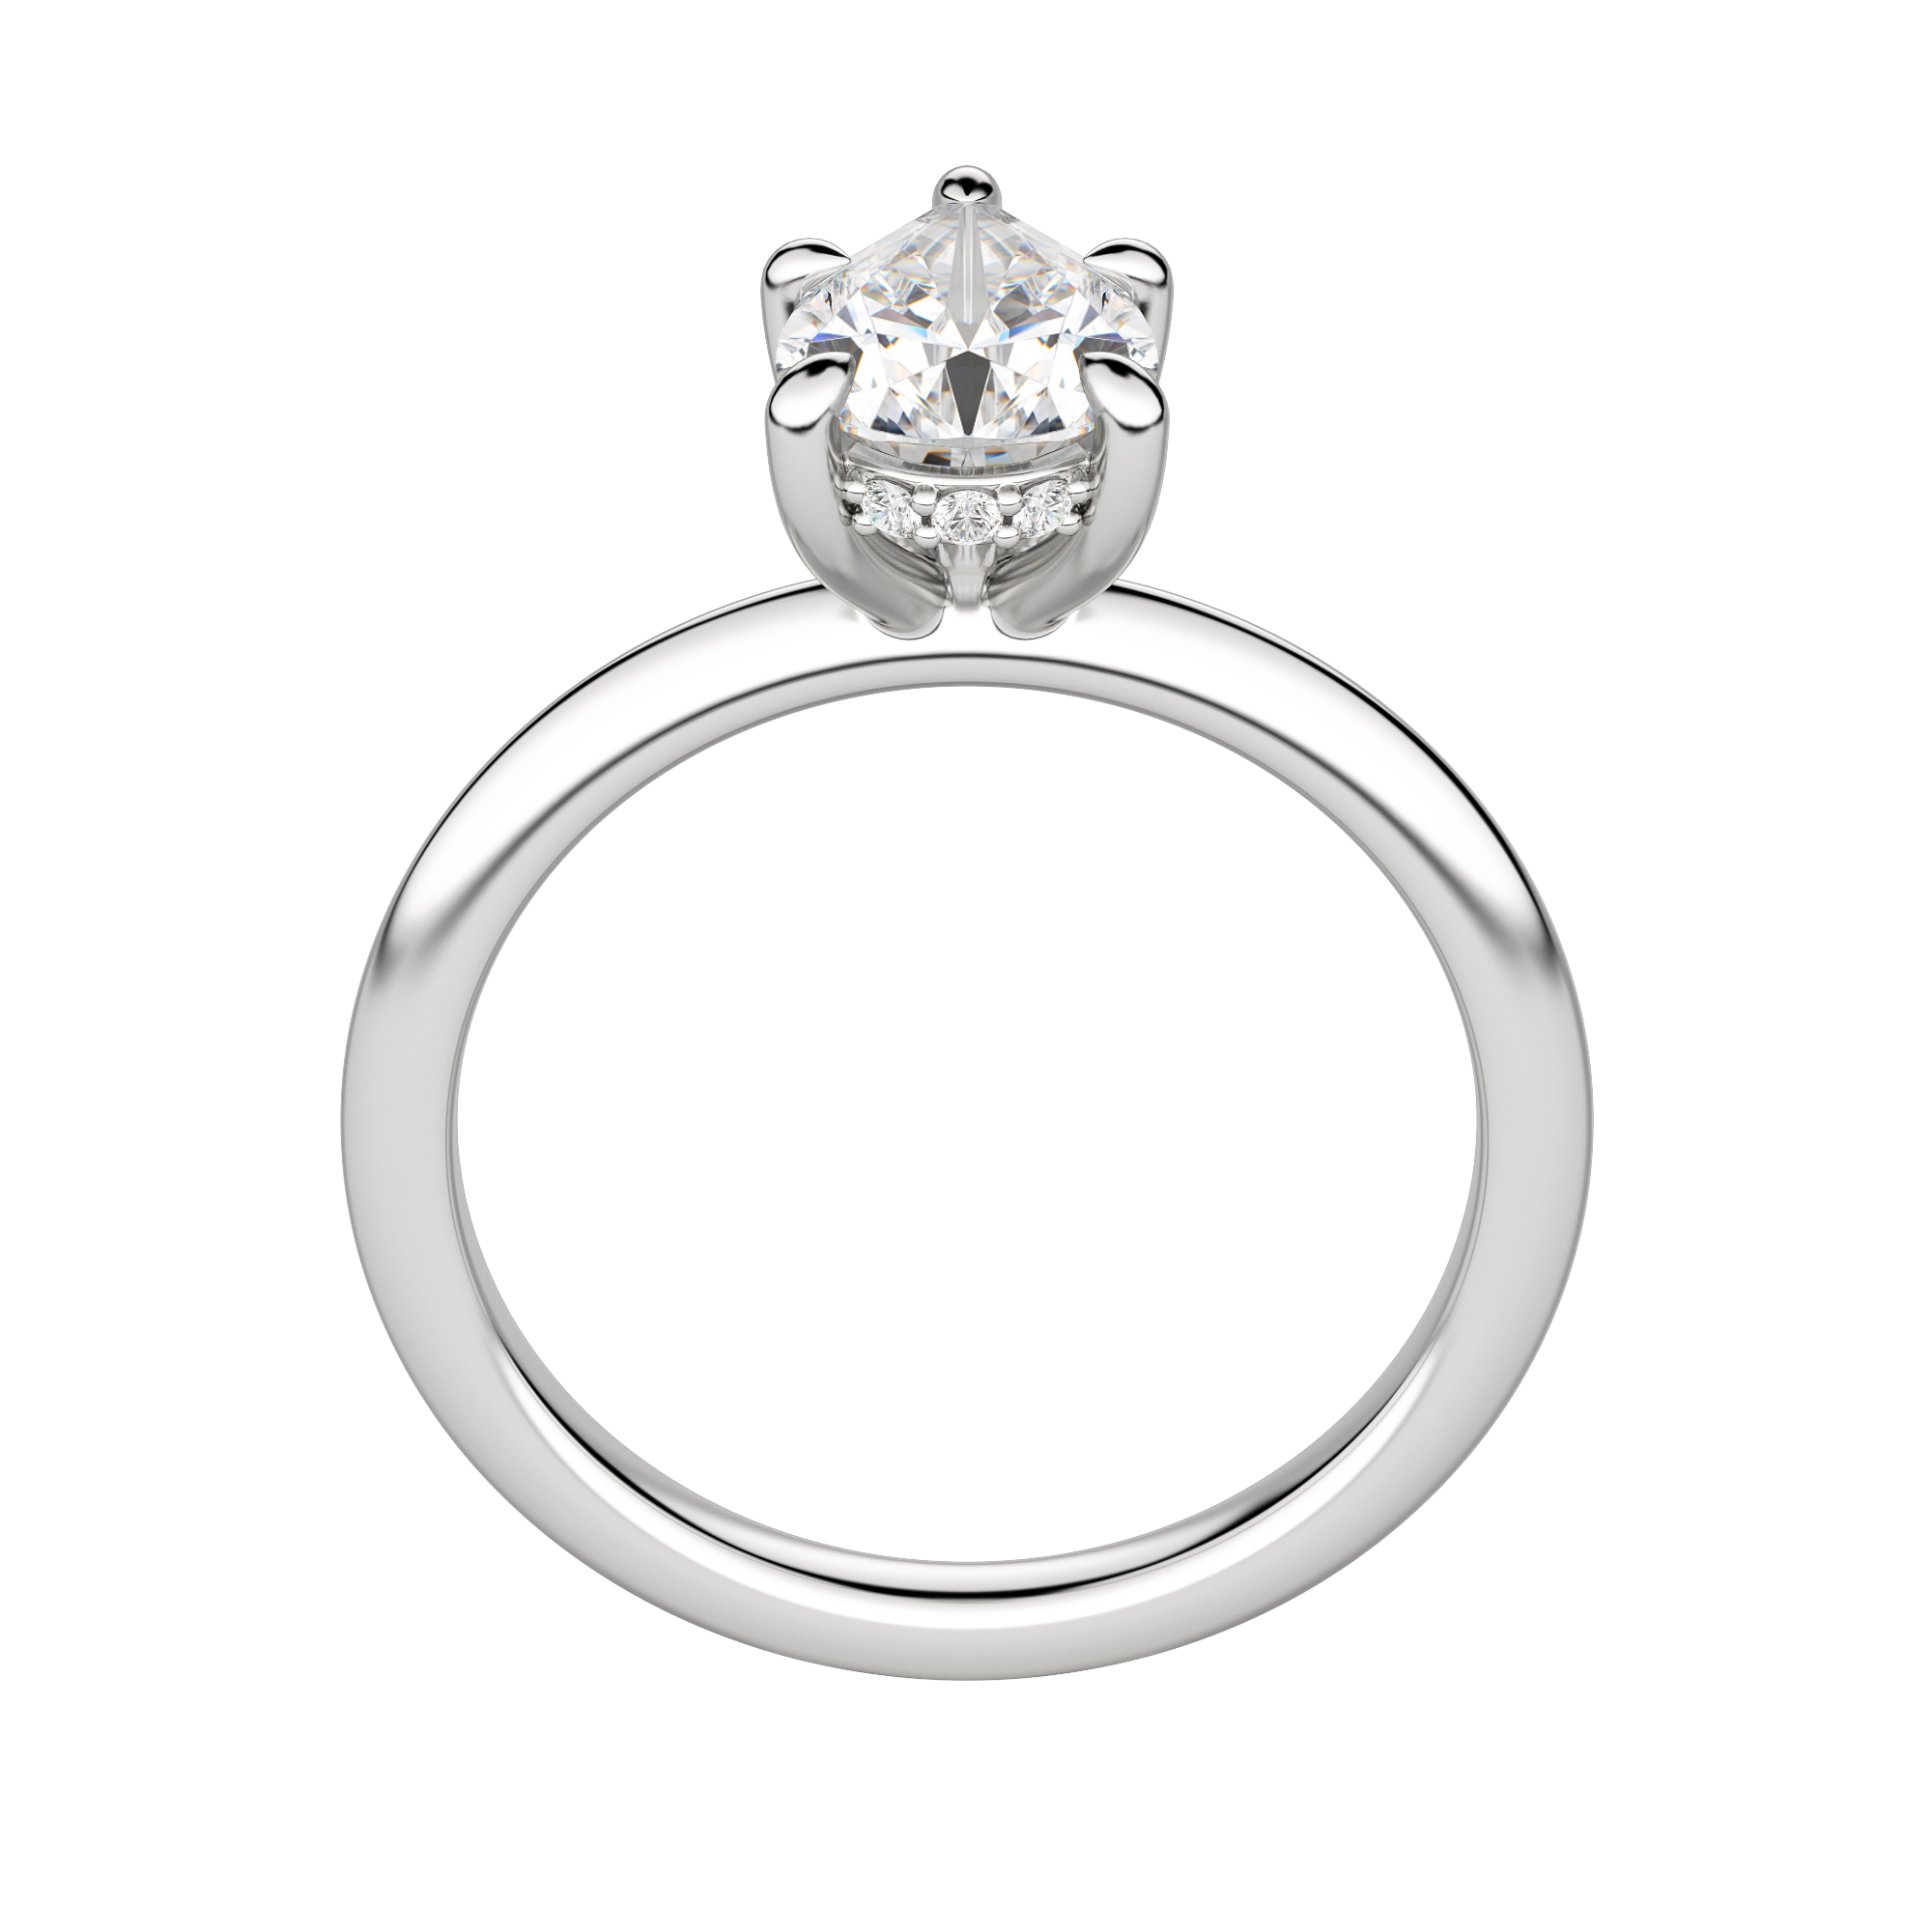 Hera Classic Pear Cut Engagement Ring, Hover, 18K White Gold, Platinum,